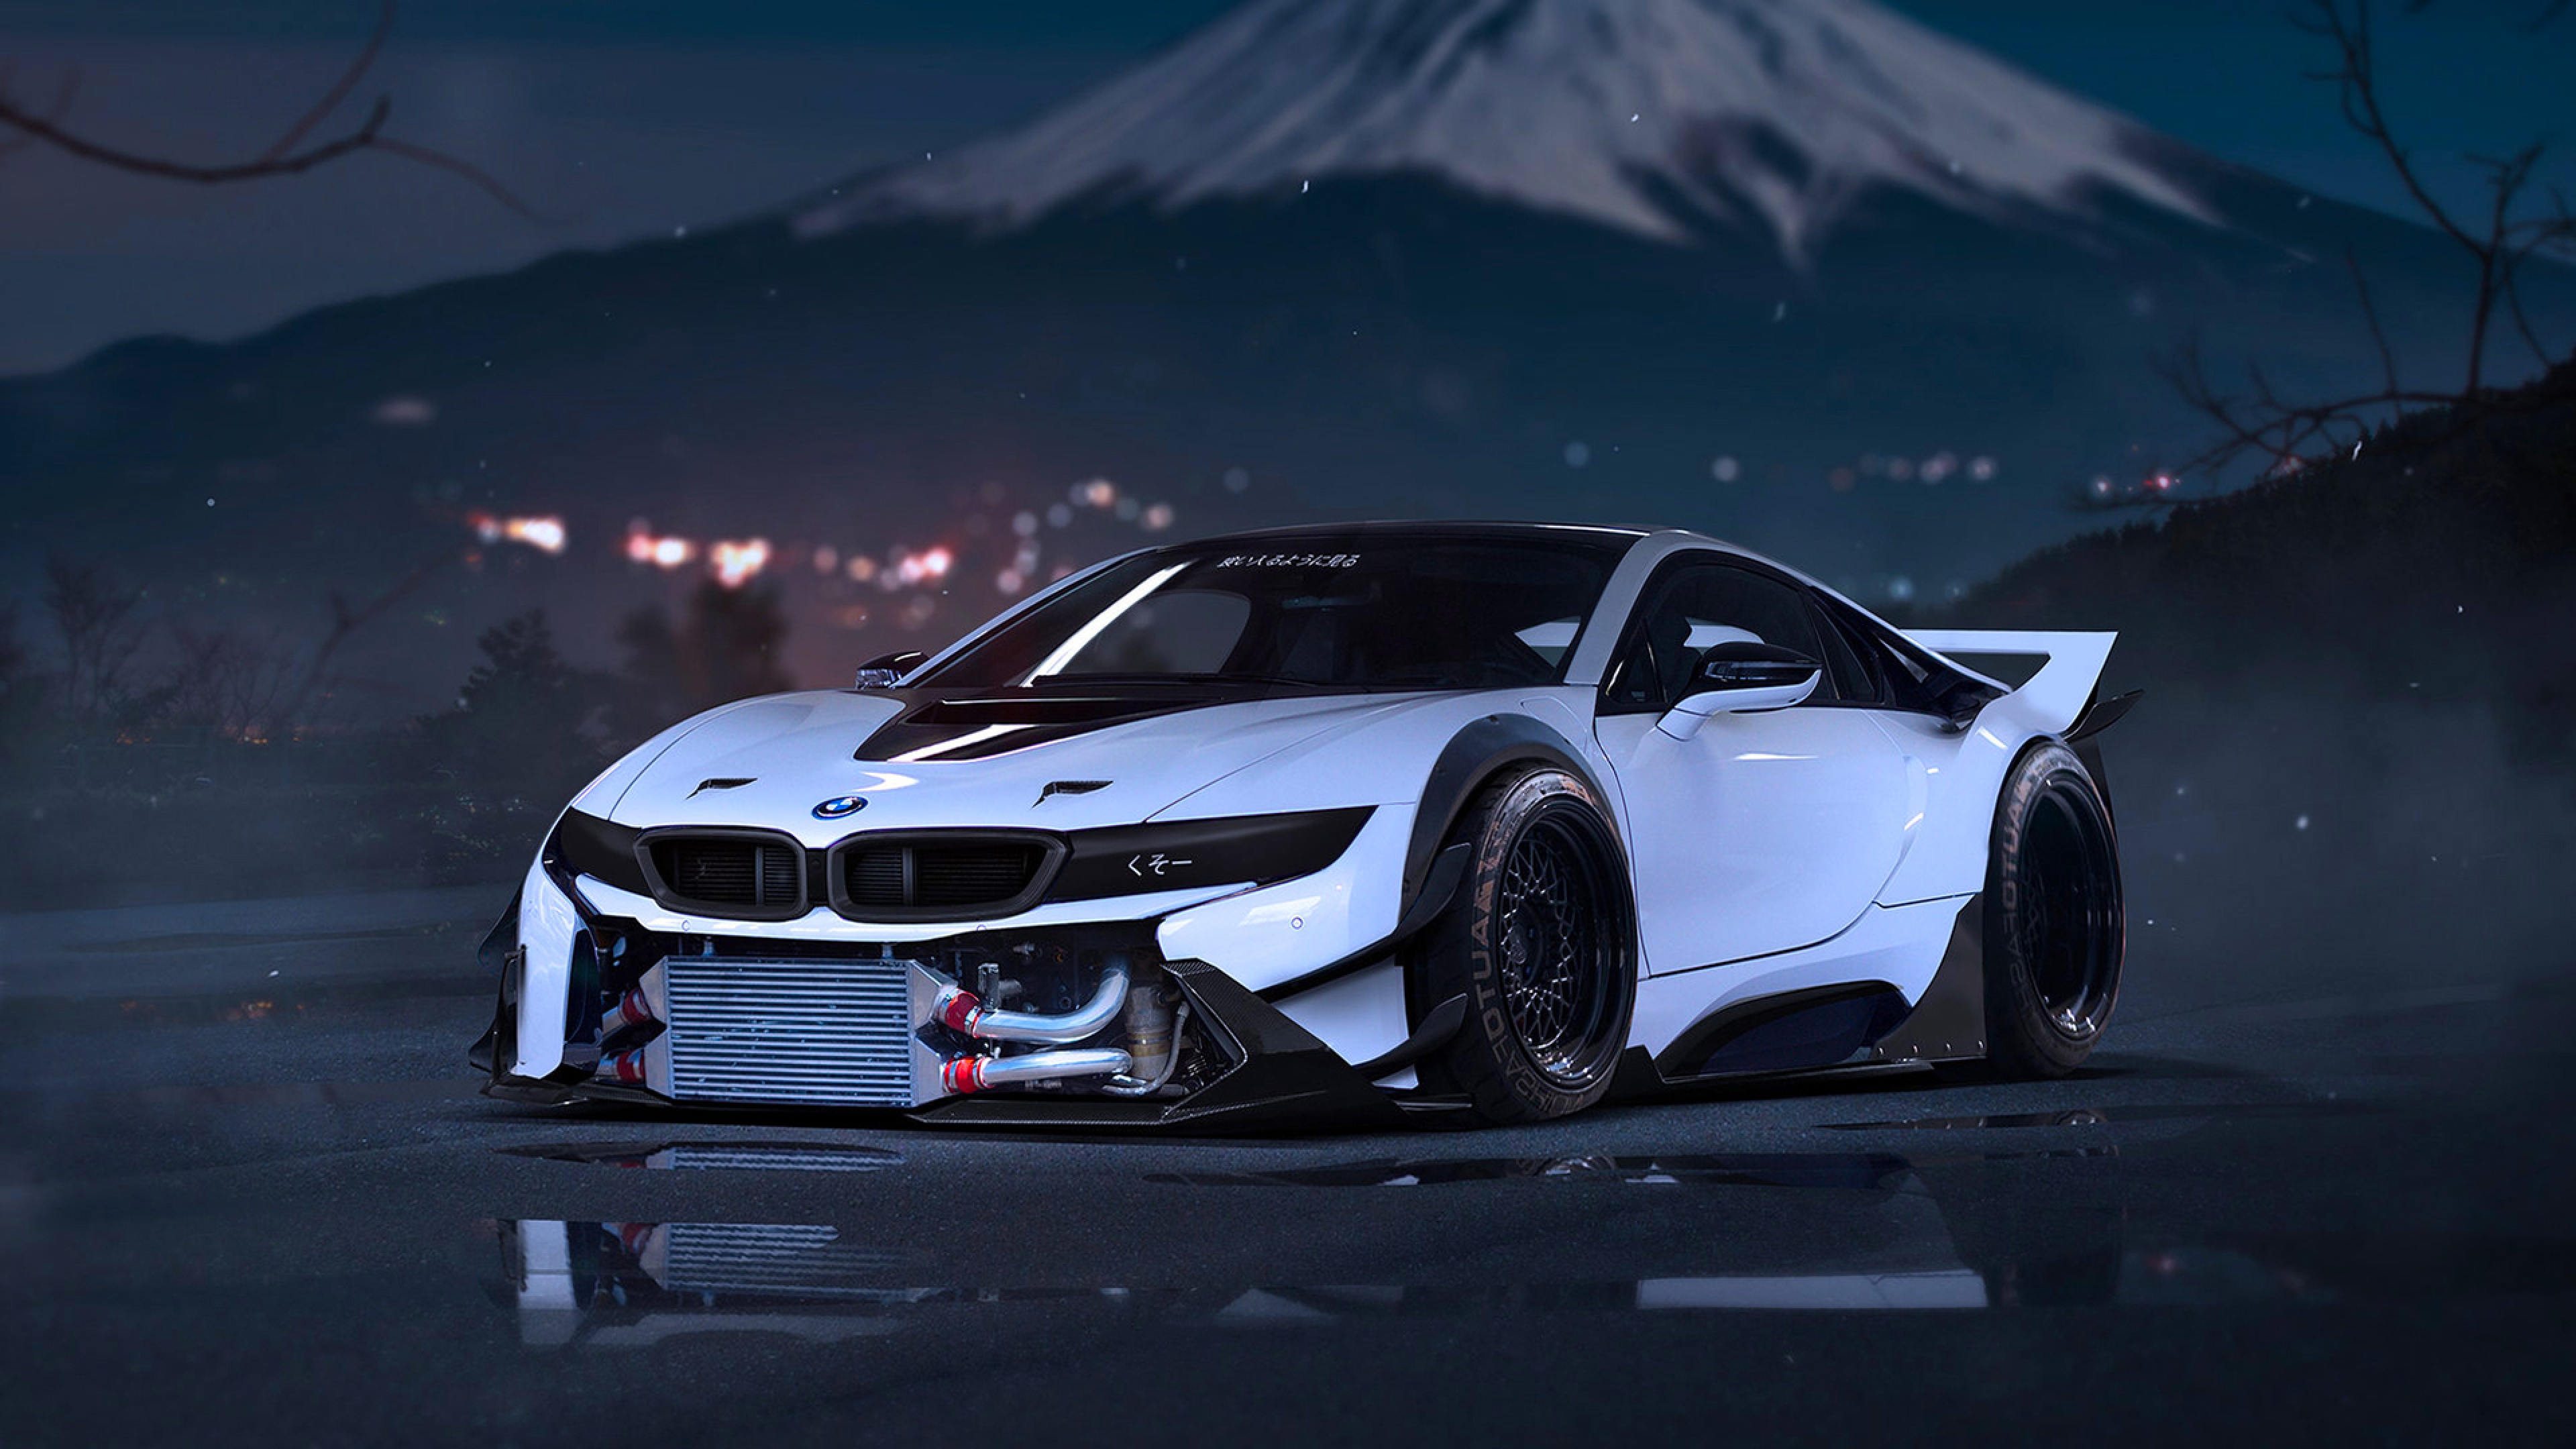  Bmw I8 Tuning Sport car Front view Wallpaper Background 4K Ultra